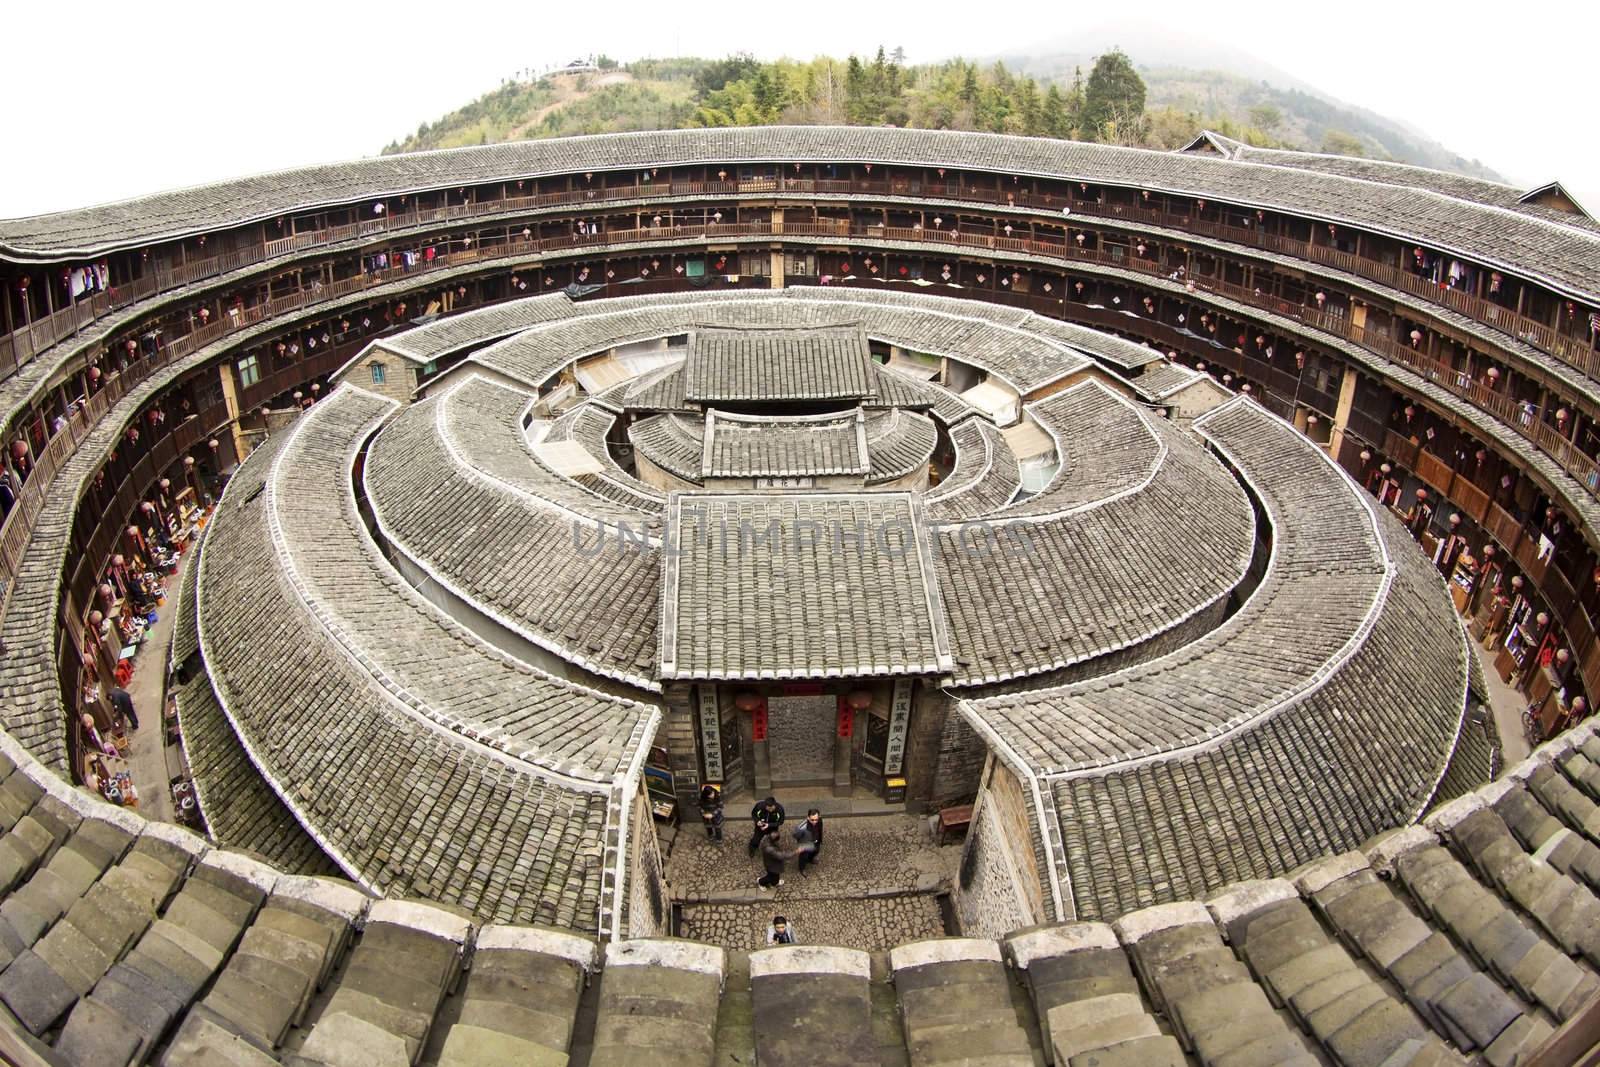 Fujian Tulou house in China. It is the Chinese rural dwellings of the Hakka and others in the mountainous areas in southeastern Fujian, China.